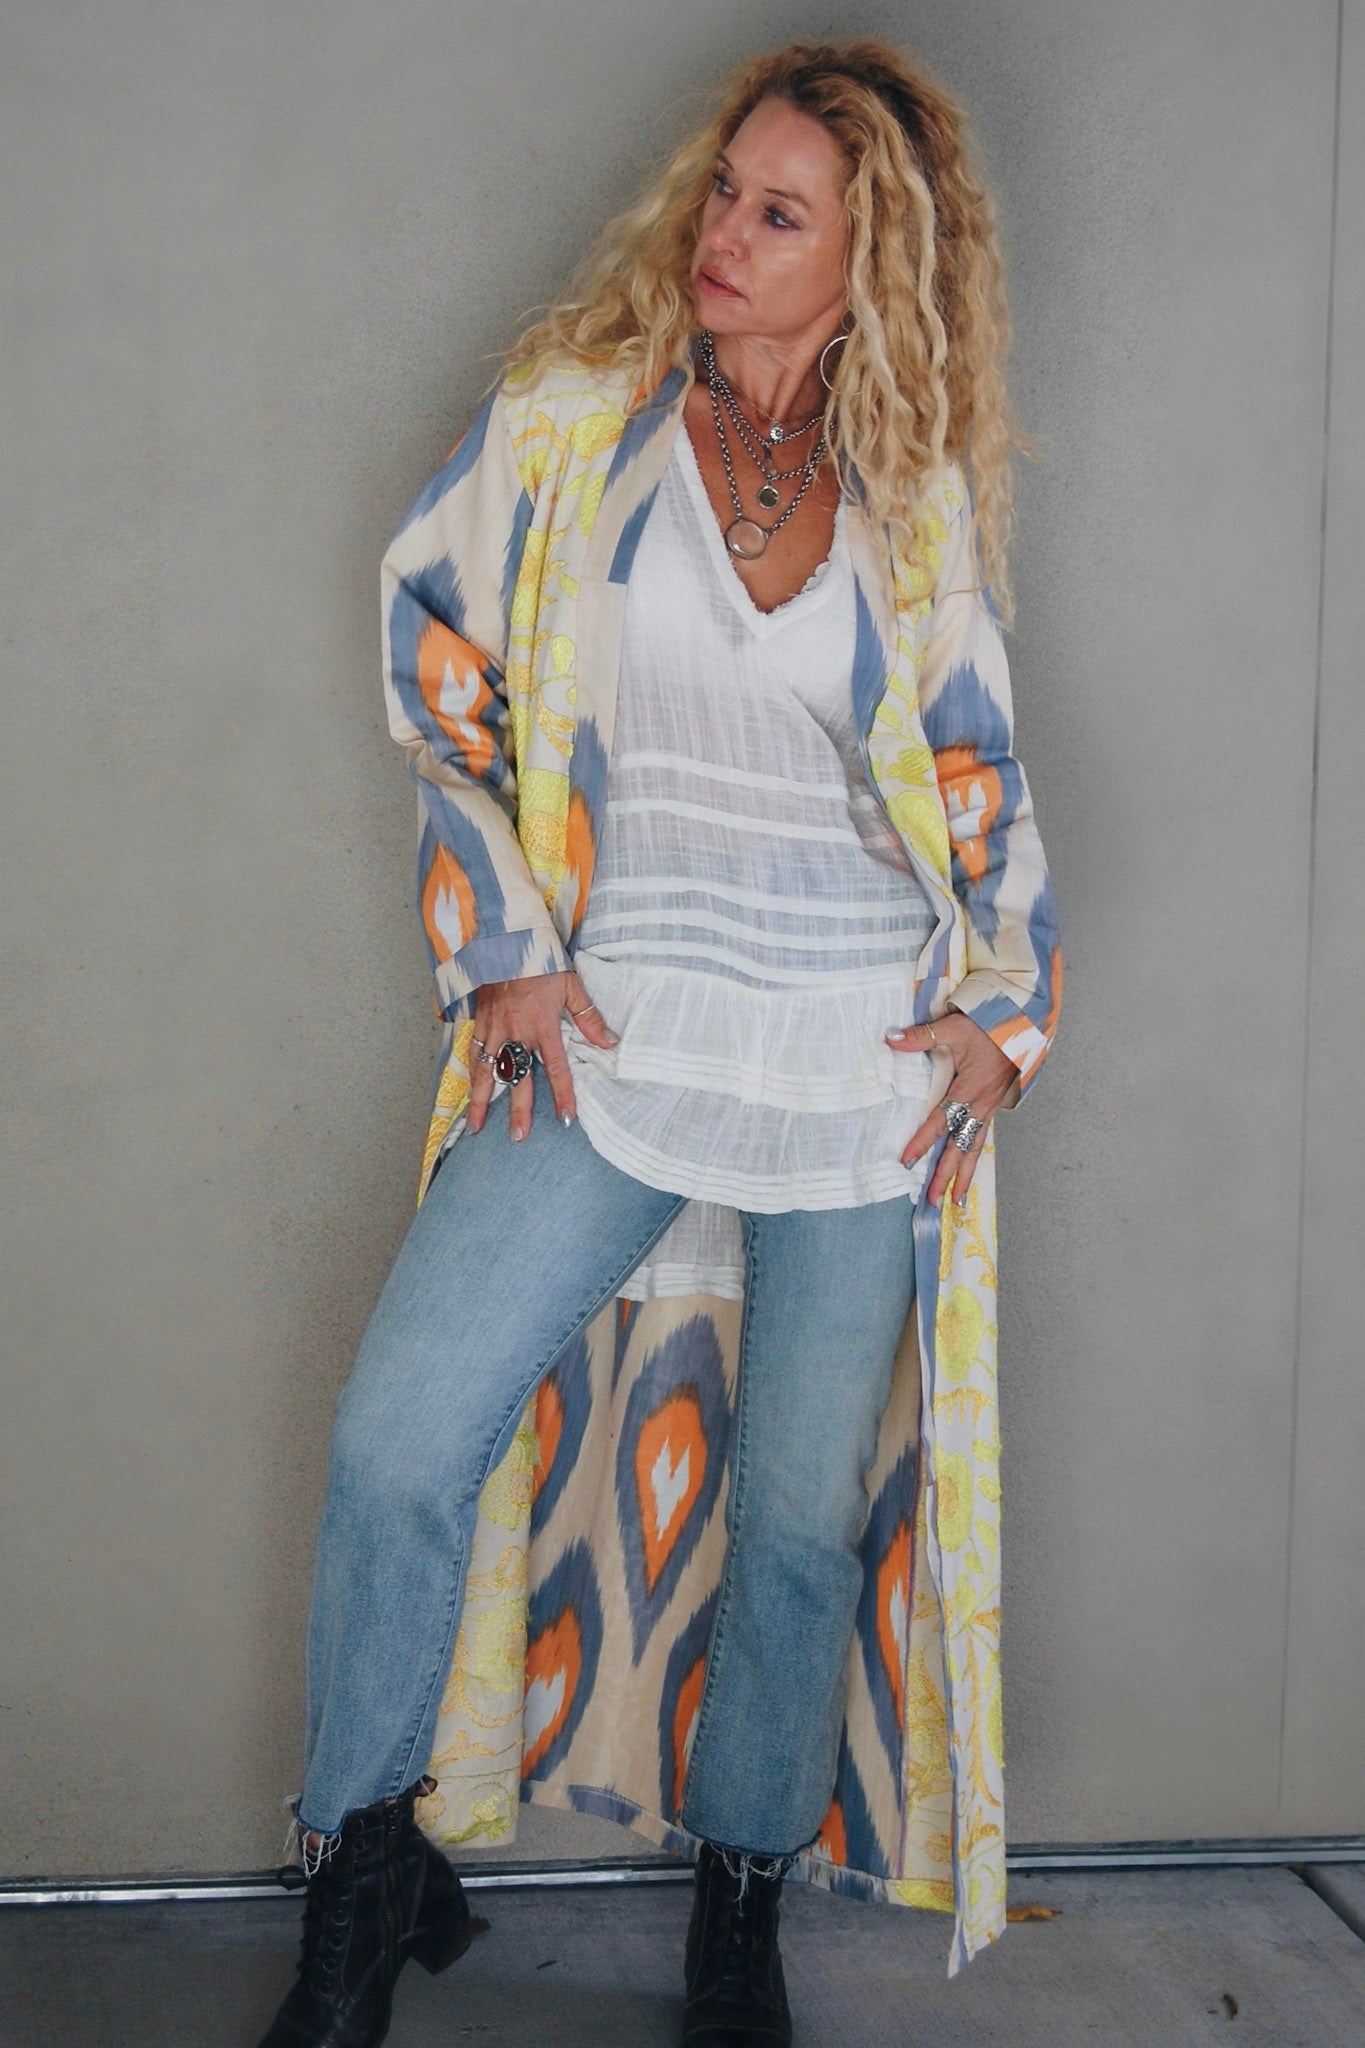 Load image into Gallery viewer, The Amelia Jacket in Peacock - SpiritedBoutiques Boho Hippie Boutique Style Jacket, Spirited
